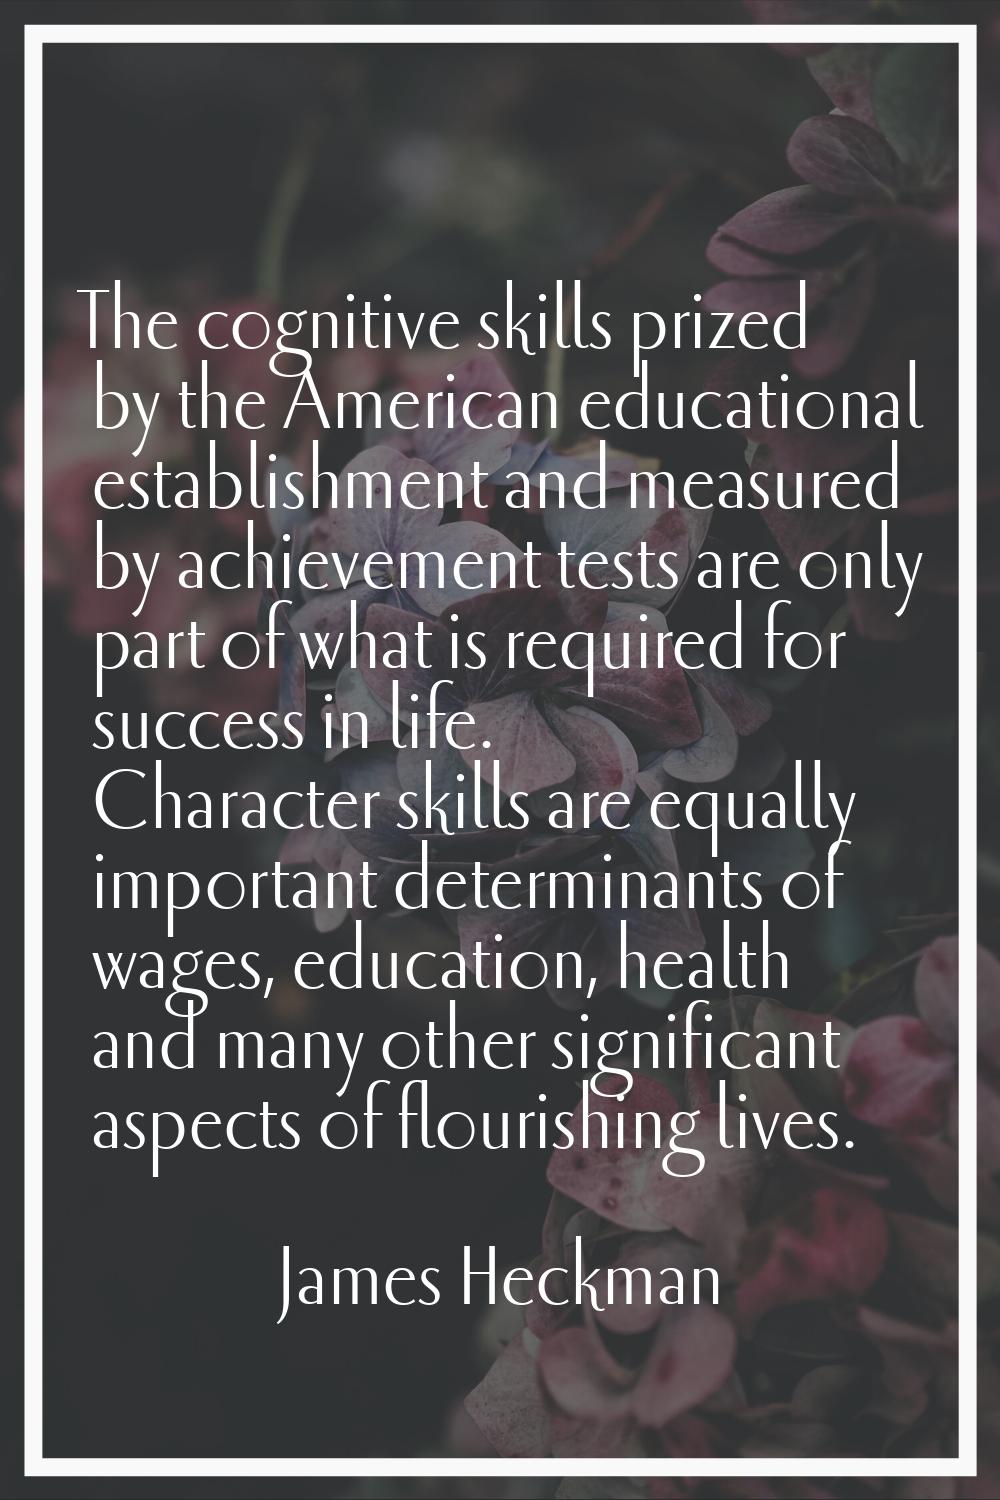 The cognitive skills prized by the American educational establishment and measured by achievement t